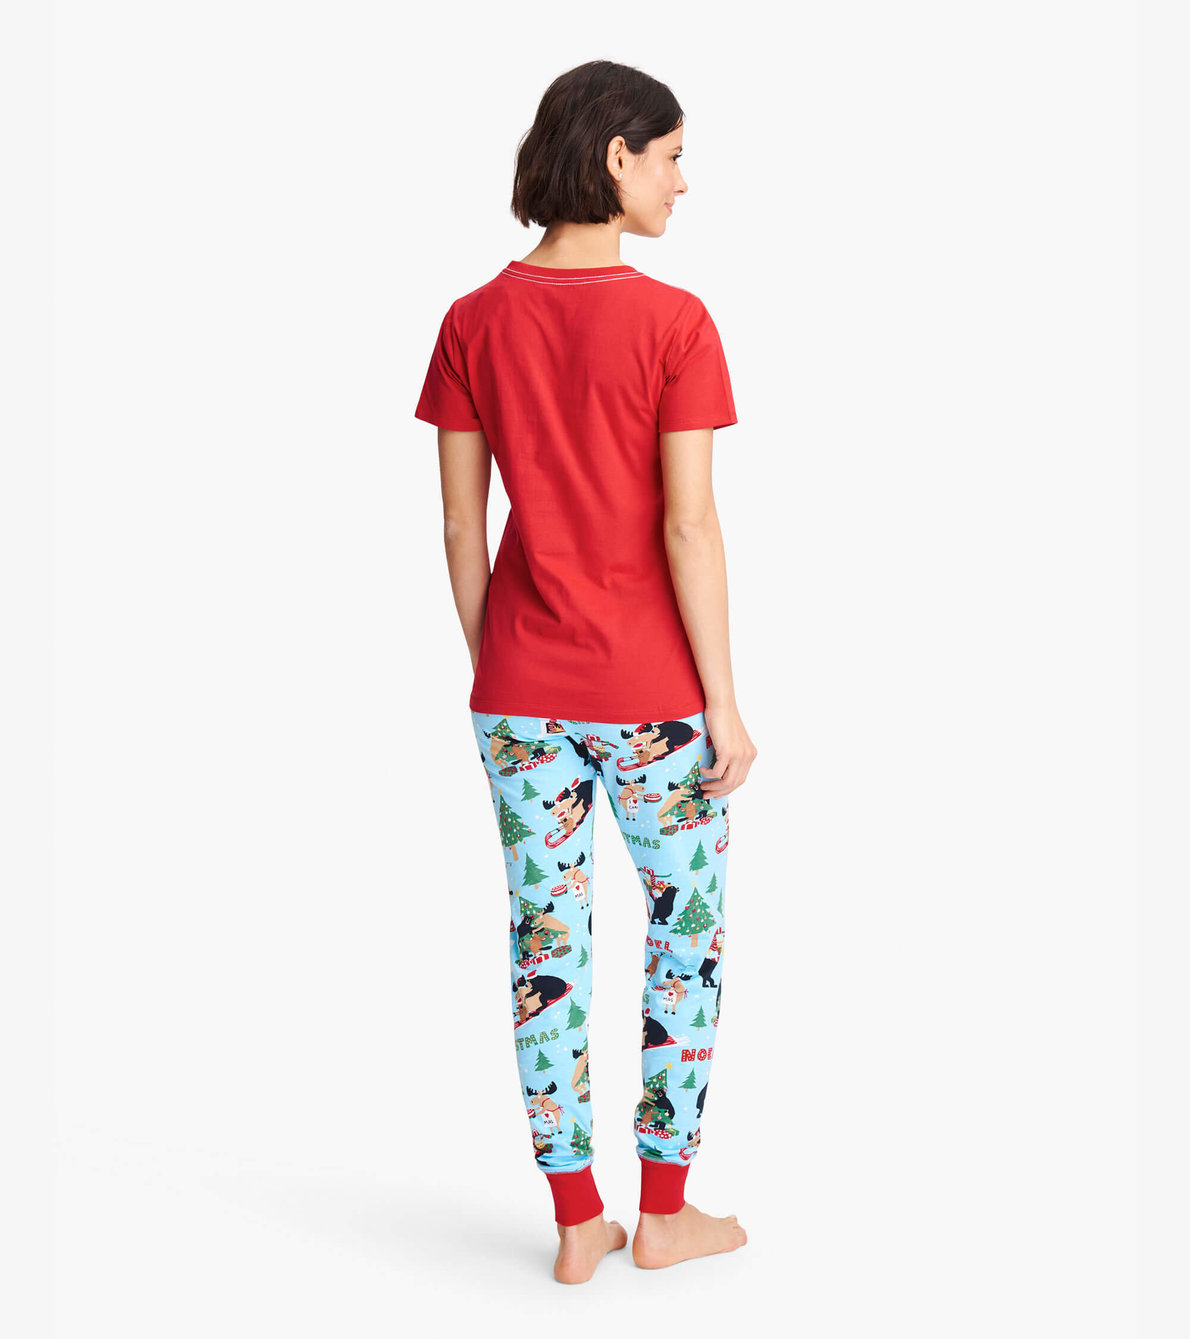 View larger image of Wild About Christmas Women's Tee and Leggings Pajama Separates